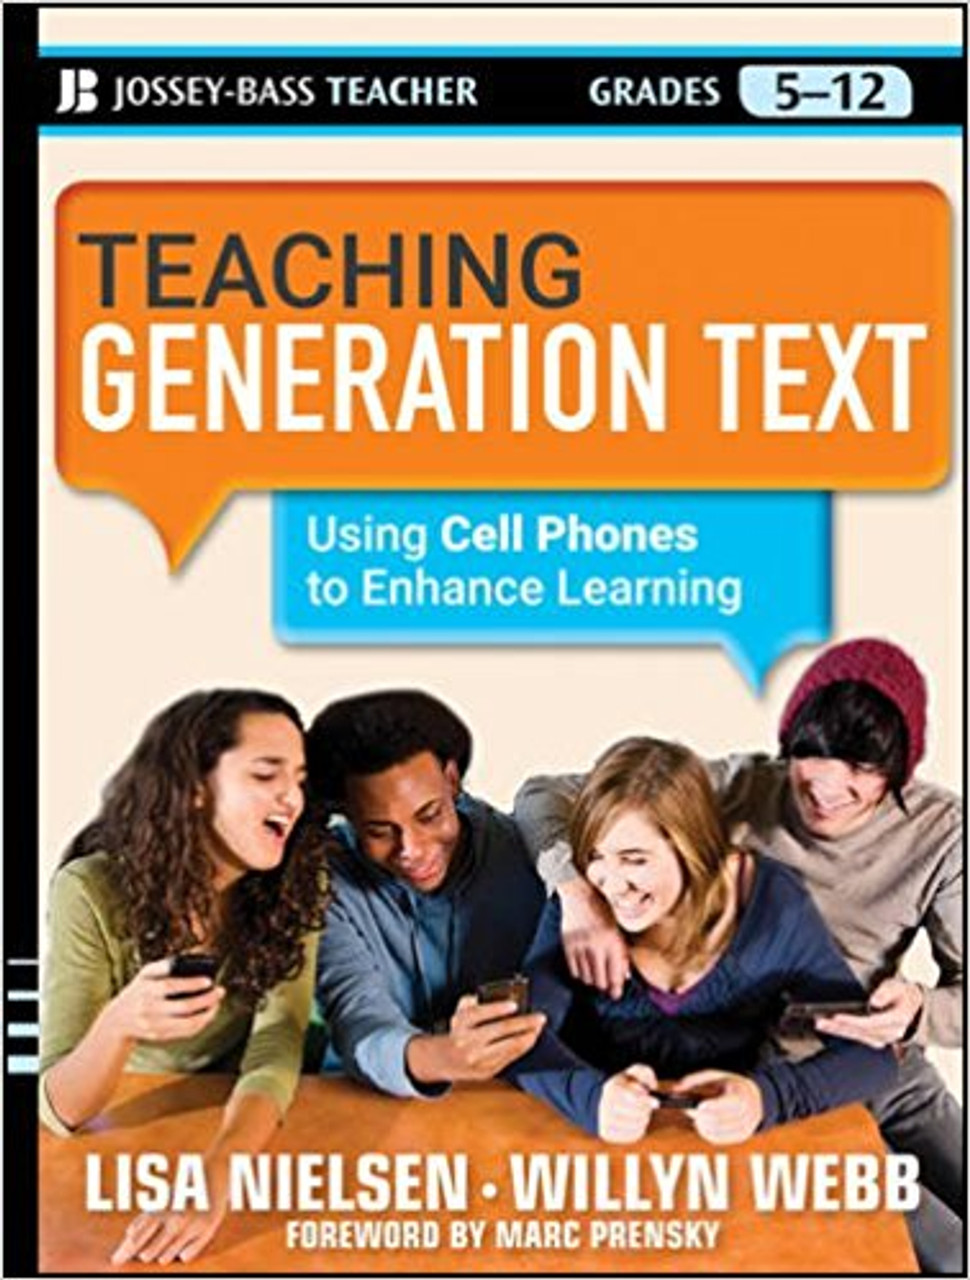 Teaching Generation Text: Using Cell Phones to Enhance Learning by Lisa Nielsen